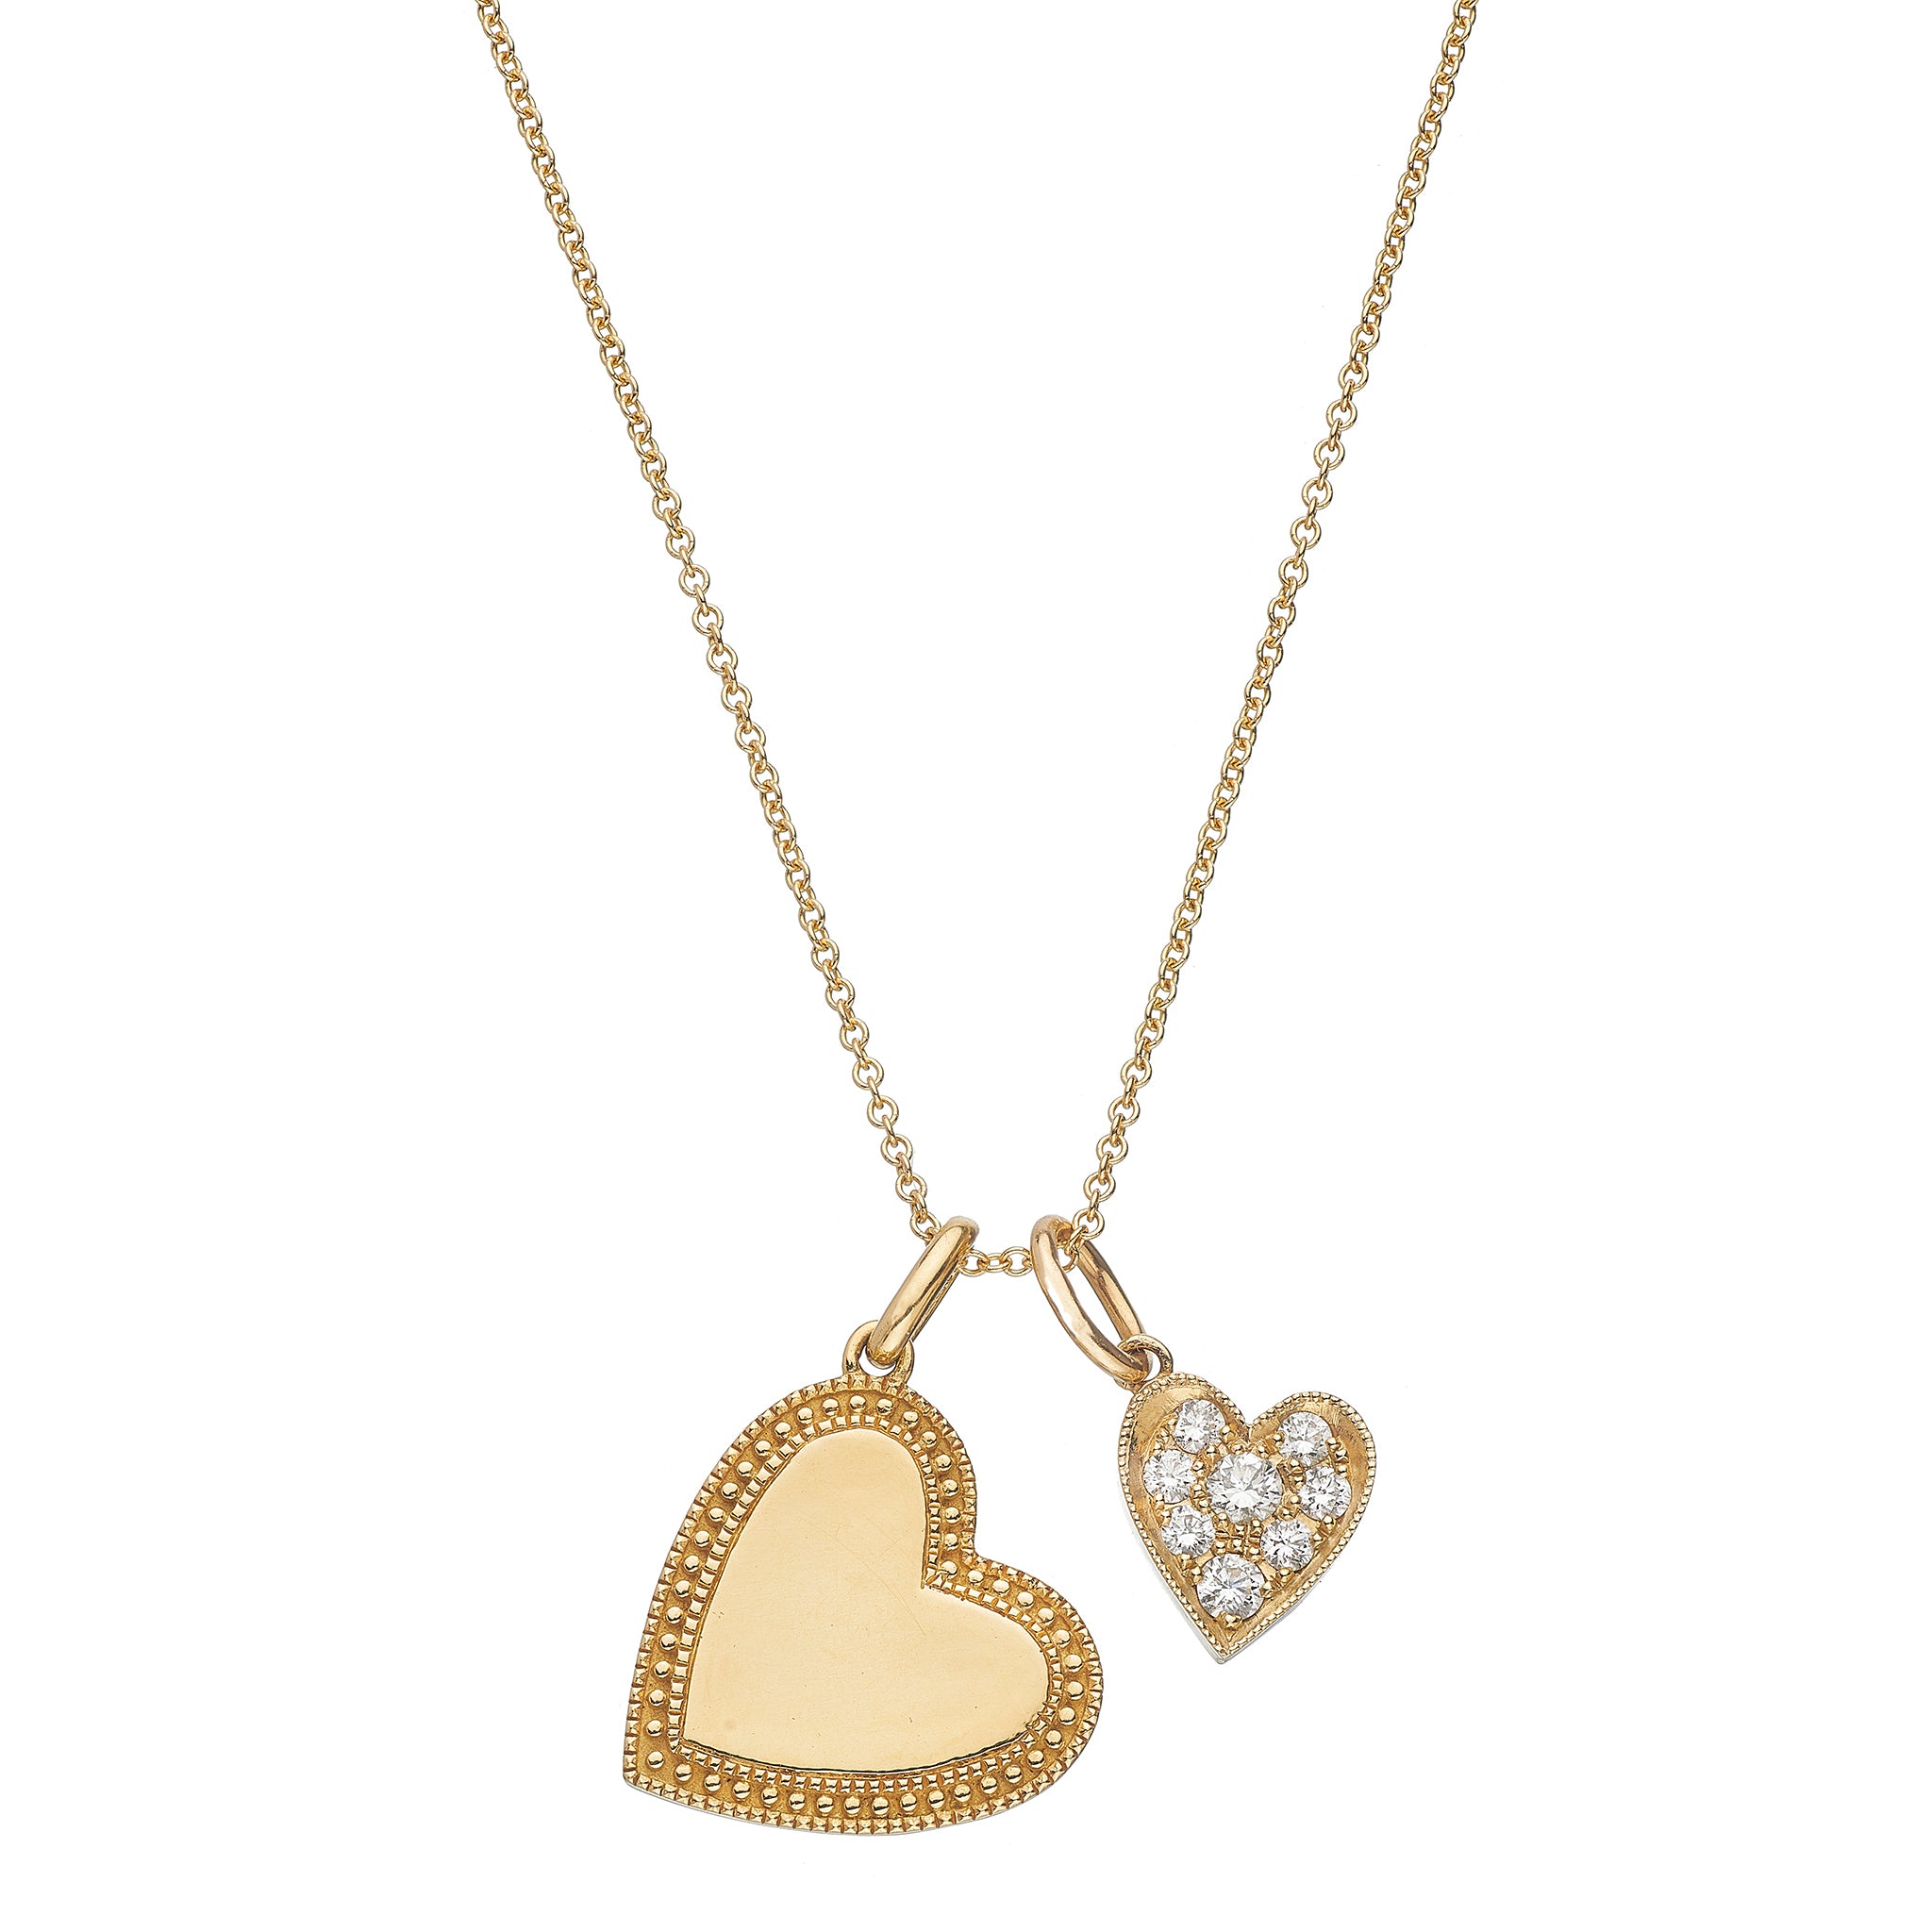 P.S. Yellow Gold Heart Charms on Oval Link Chain